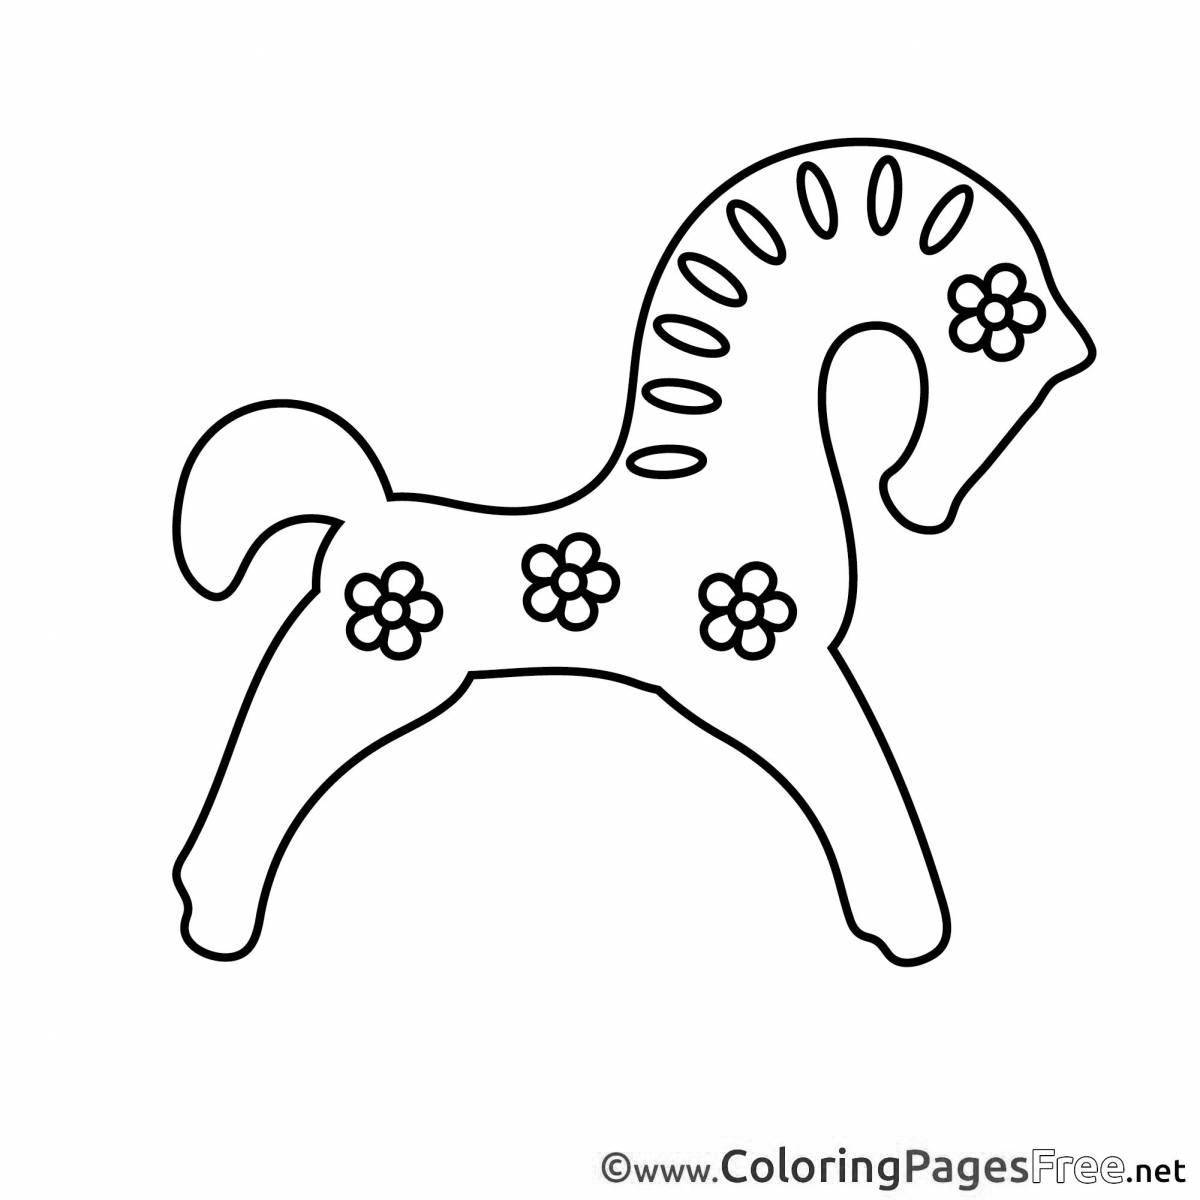 Attractive filimon horse coloring page for youth